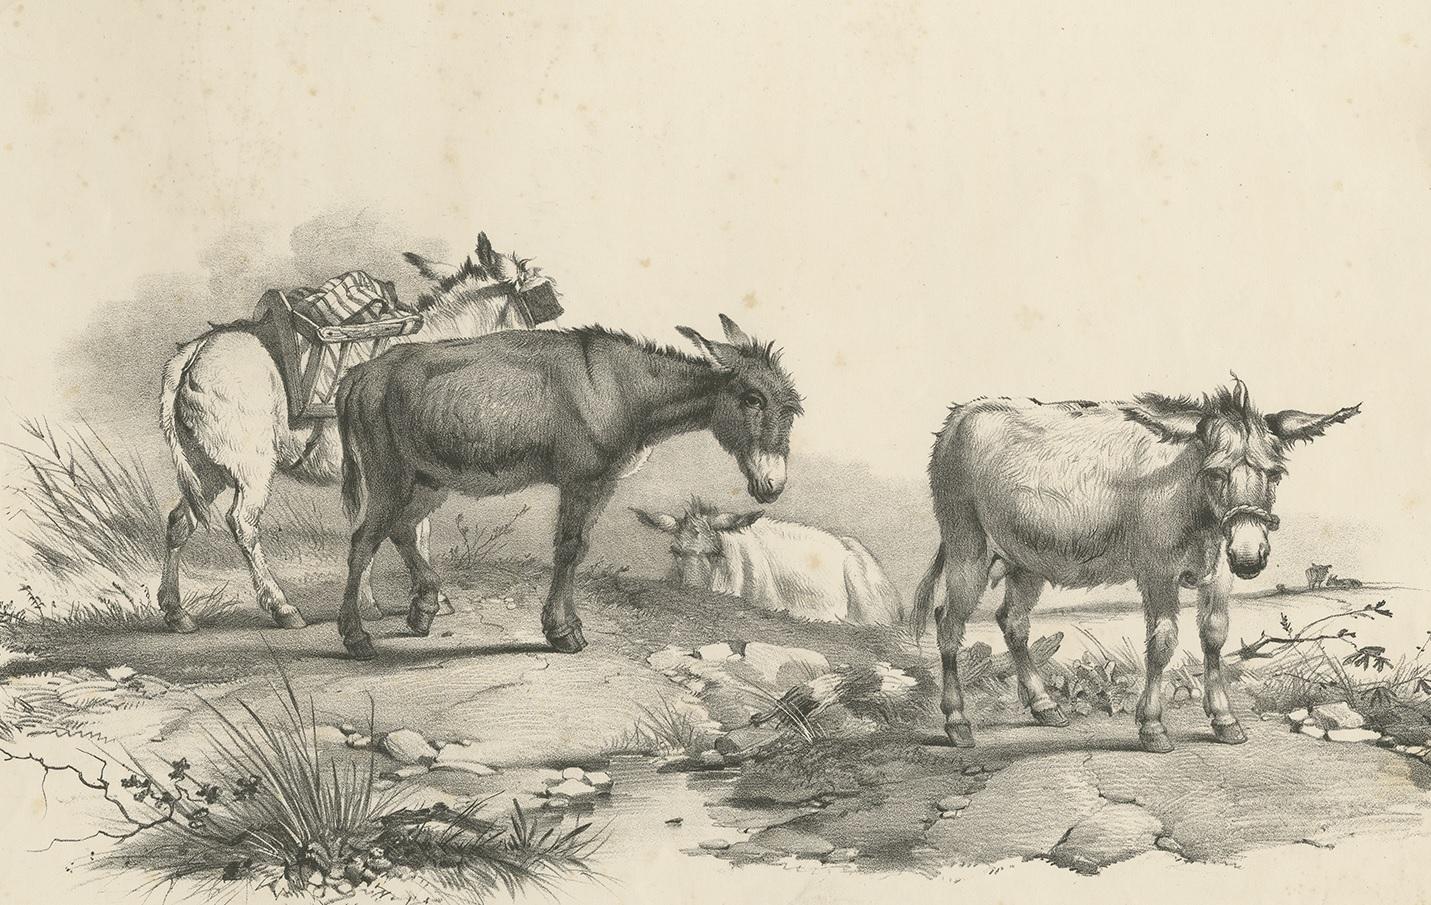 Antique print of various donkeys. This print originates from 'Cattle Subjects' by Thomas Sidney Cooper. He was an English landscape painter noted for his images of cattle and farm animals.